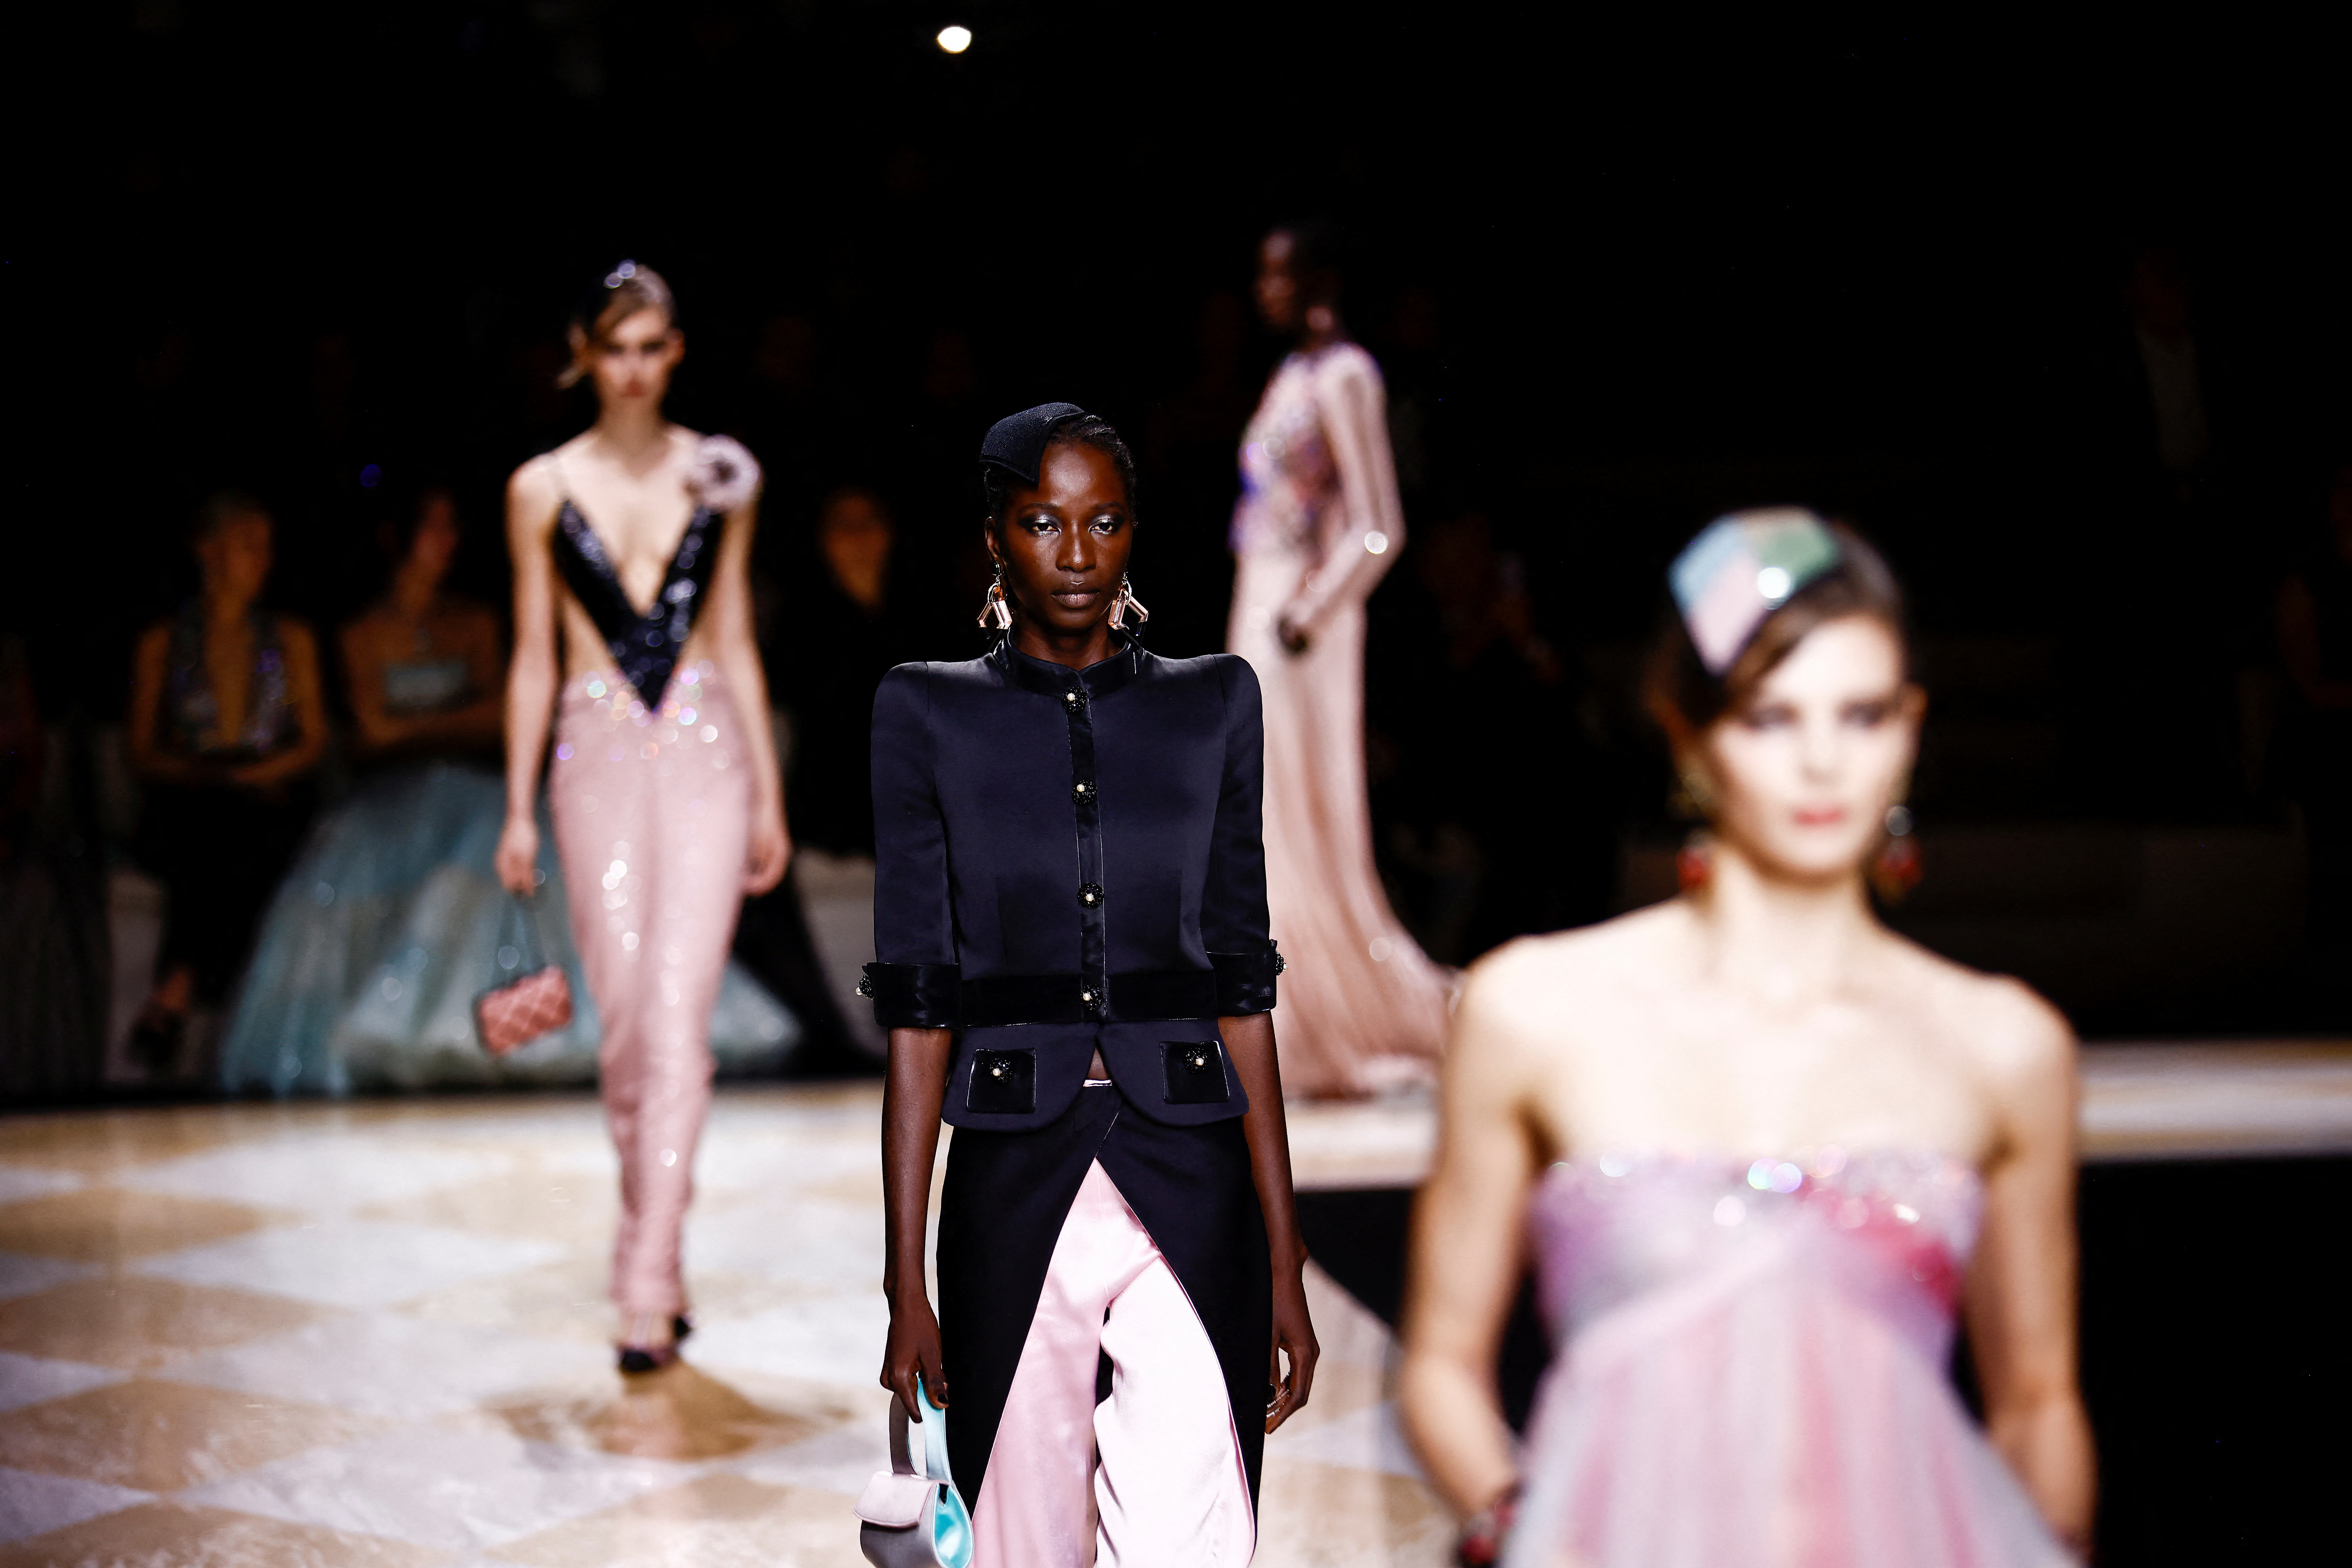 Glitz, glamor and going out: London Fashion Week returns to the spectacle